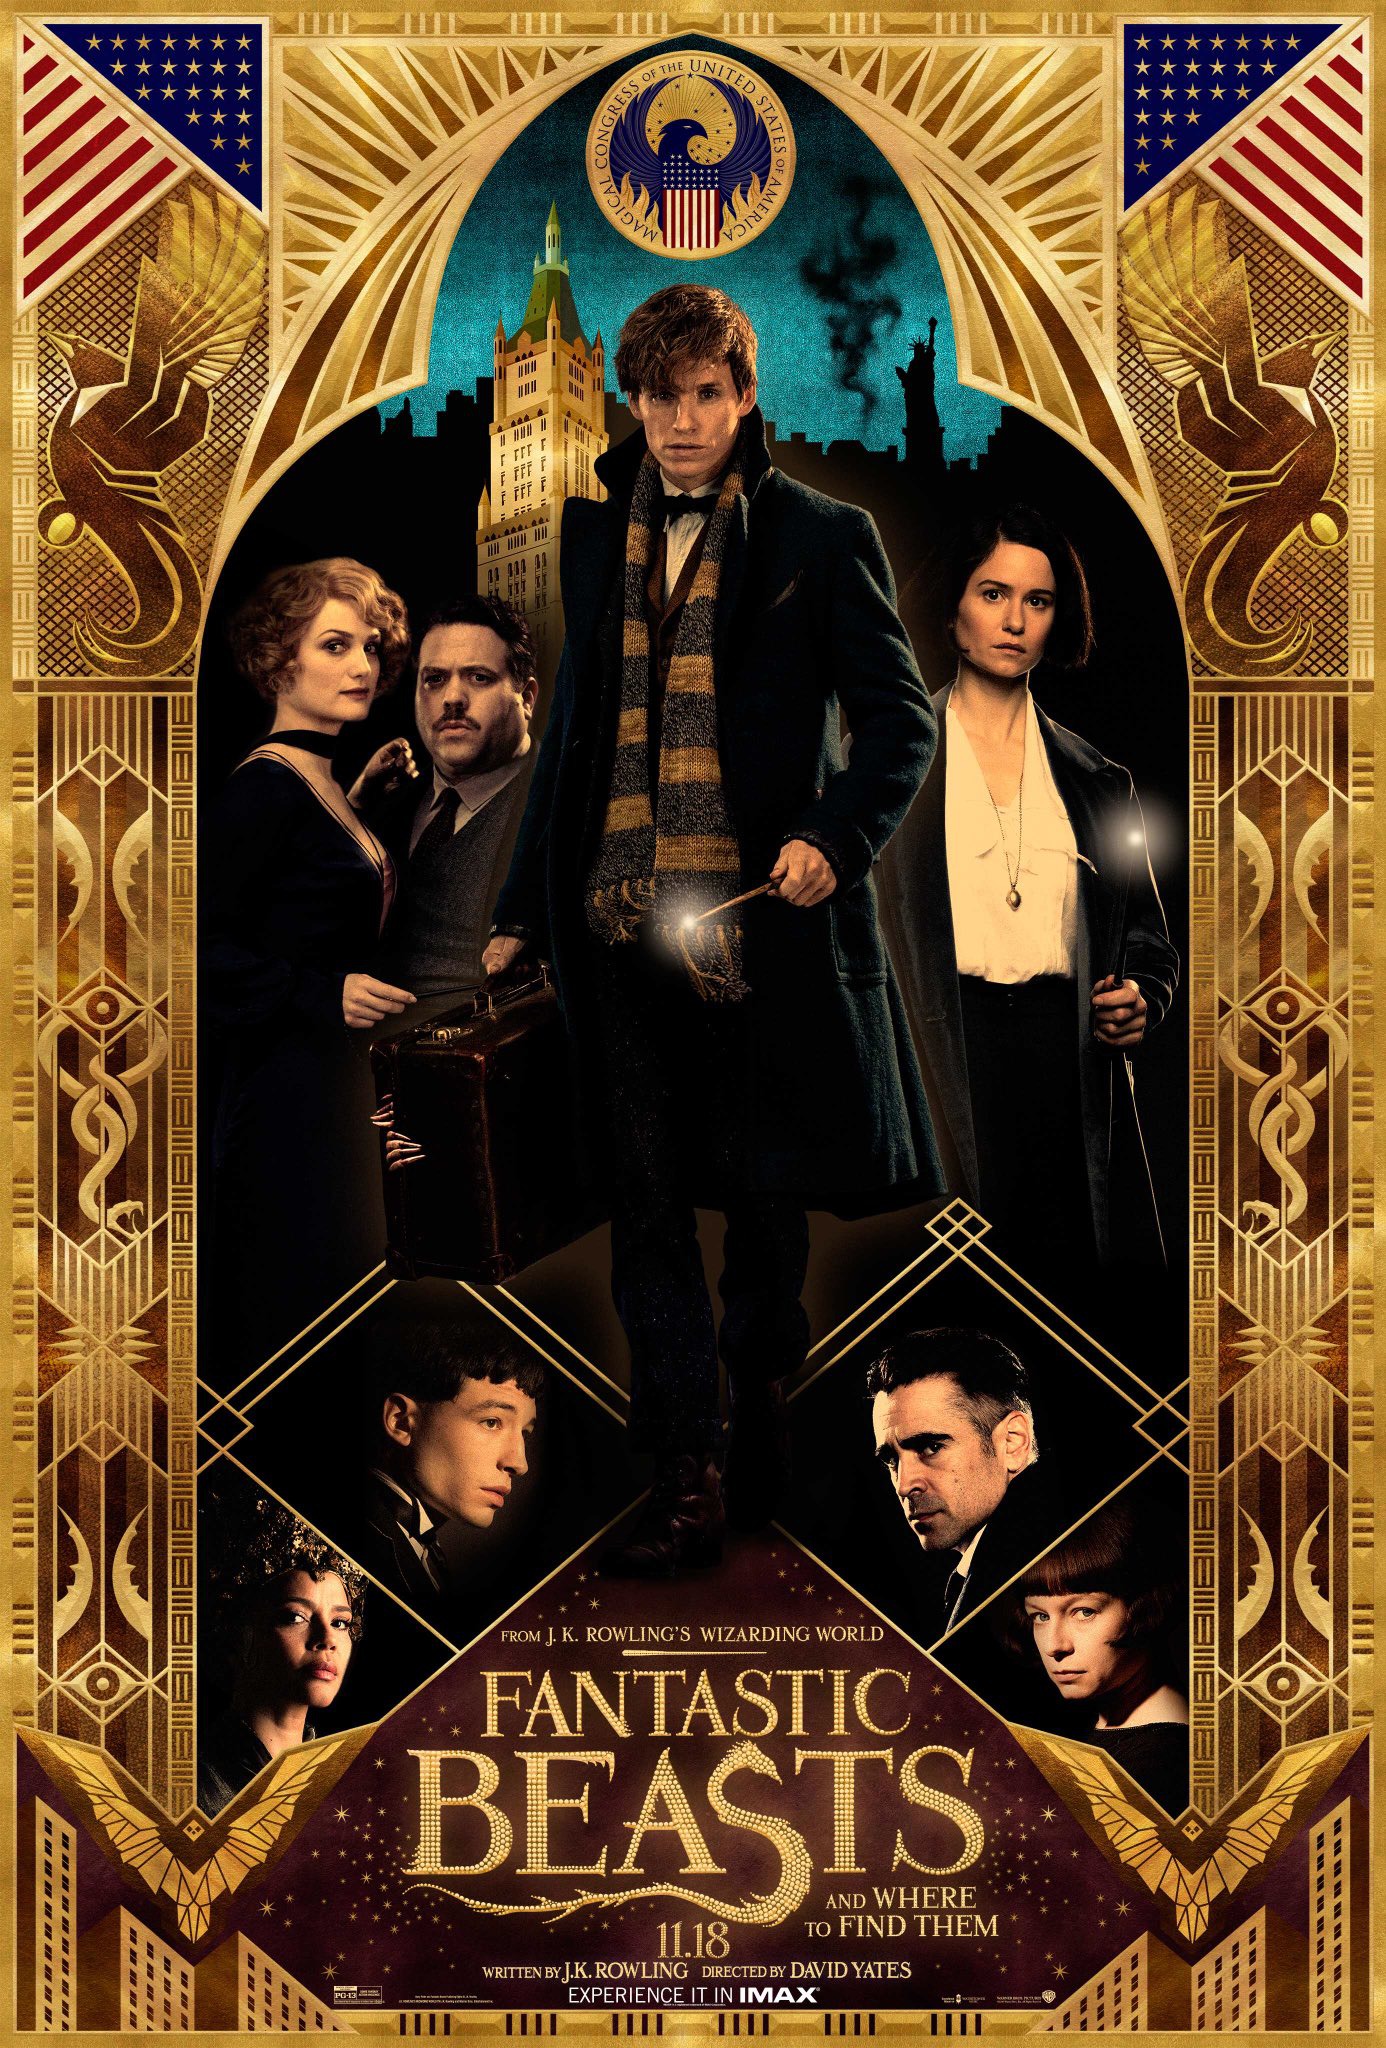 Fantastic Beasts And Where To Find Them Trailer 2016 Online Watch